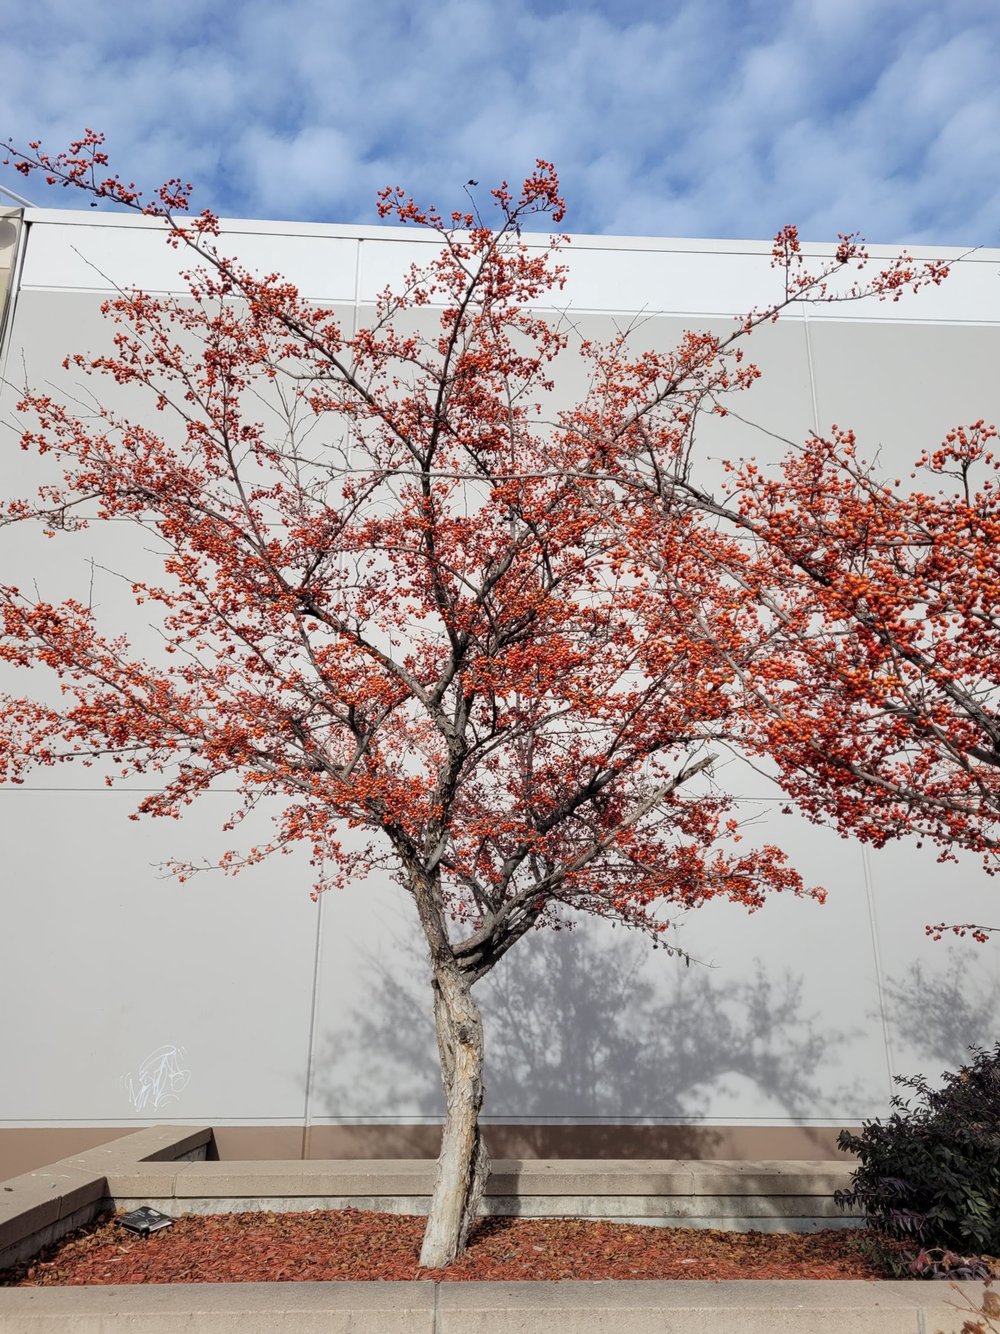 Tree with persistent fruit in parking lot.